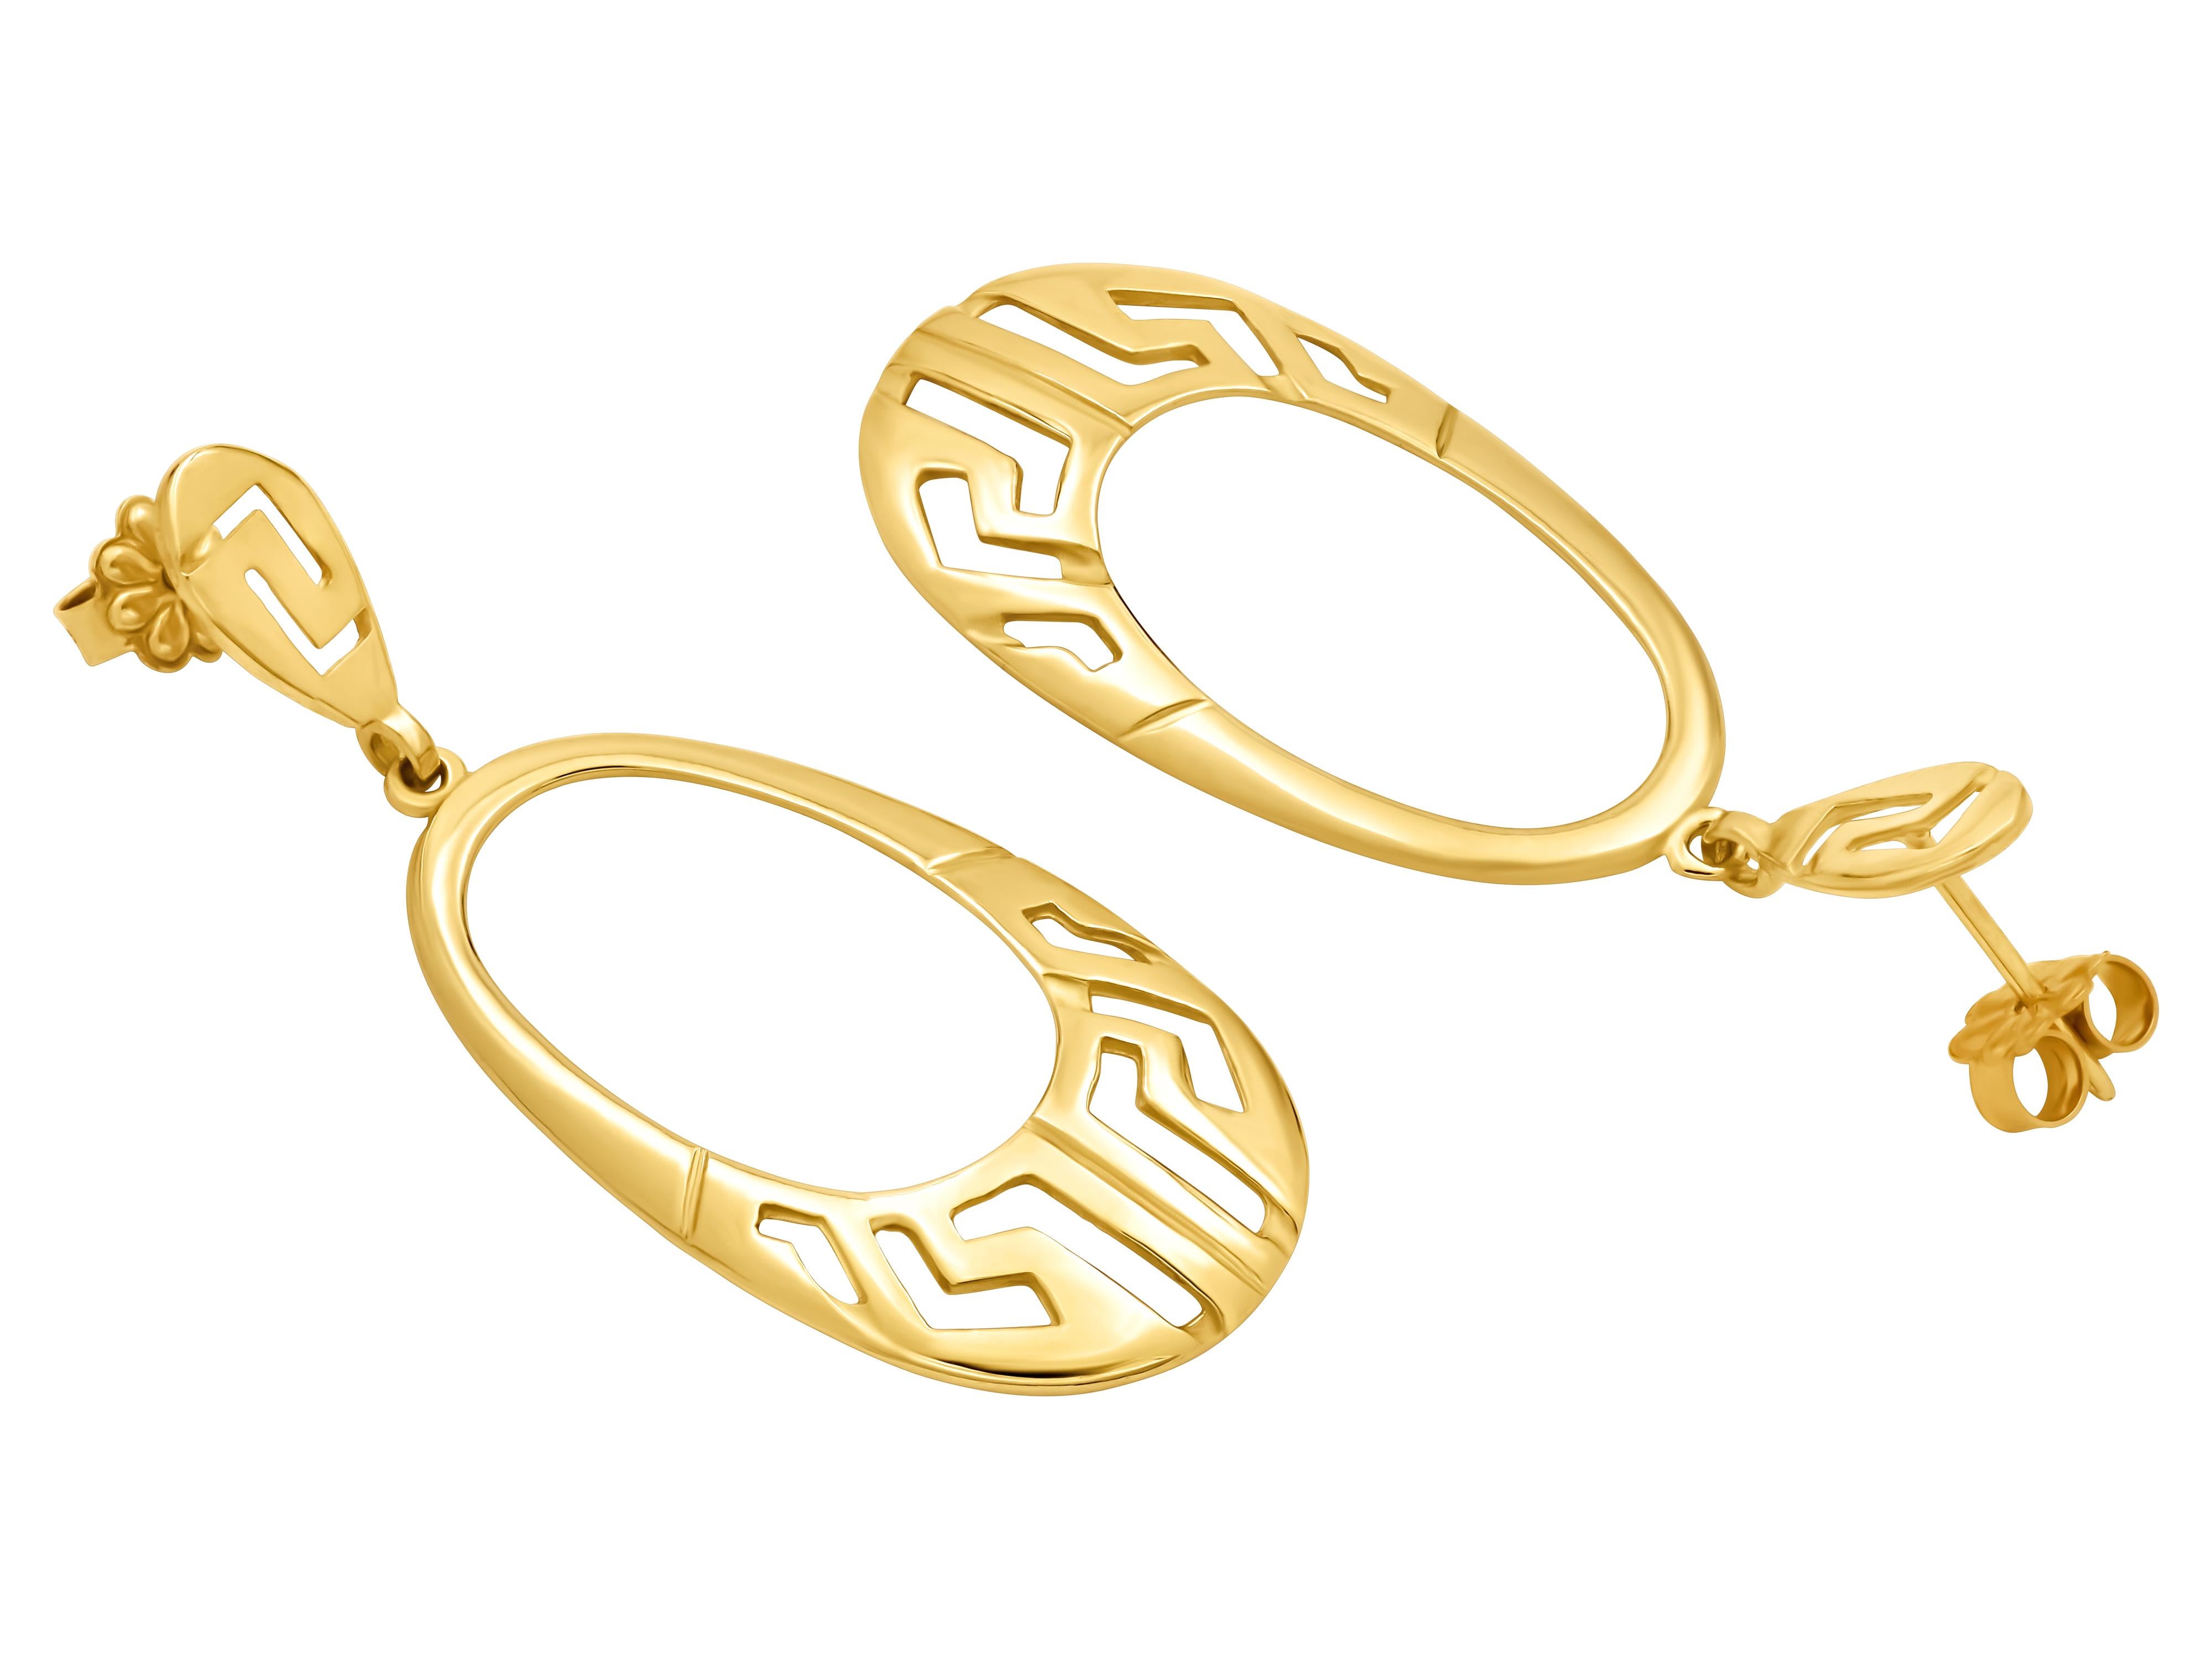 Greek key oval earrings in 18k yellow gold. Unique and not commercial piece with depth and character. A not small size but very light in the eyes due to its openness. Can be made to order in white gold or set with a diamond pave finish. You will